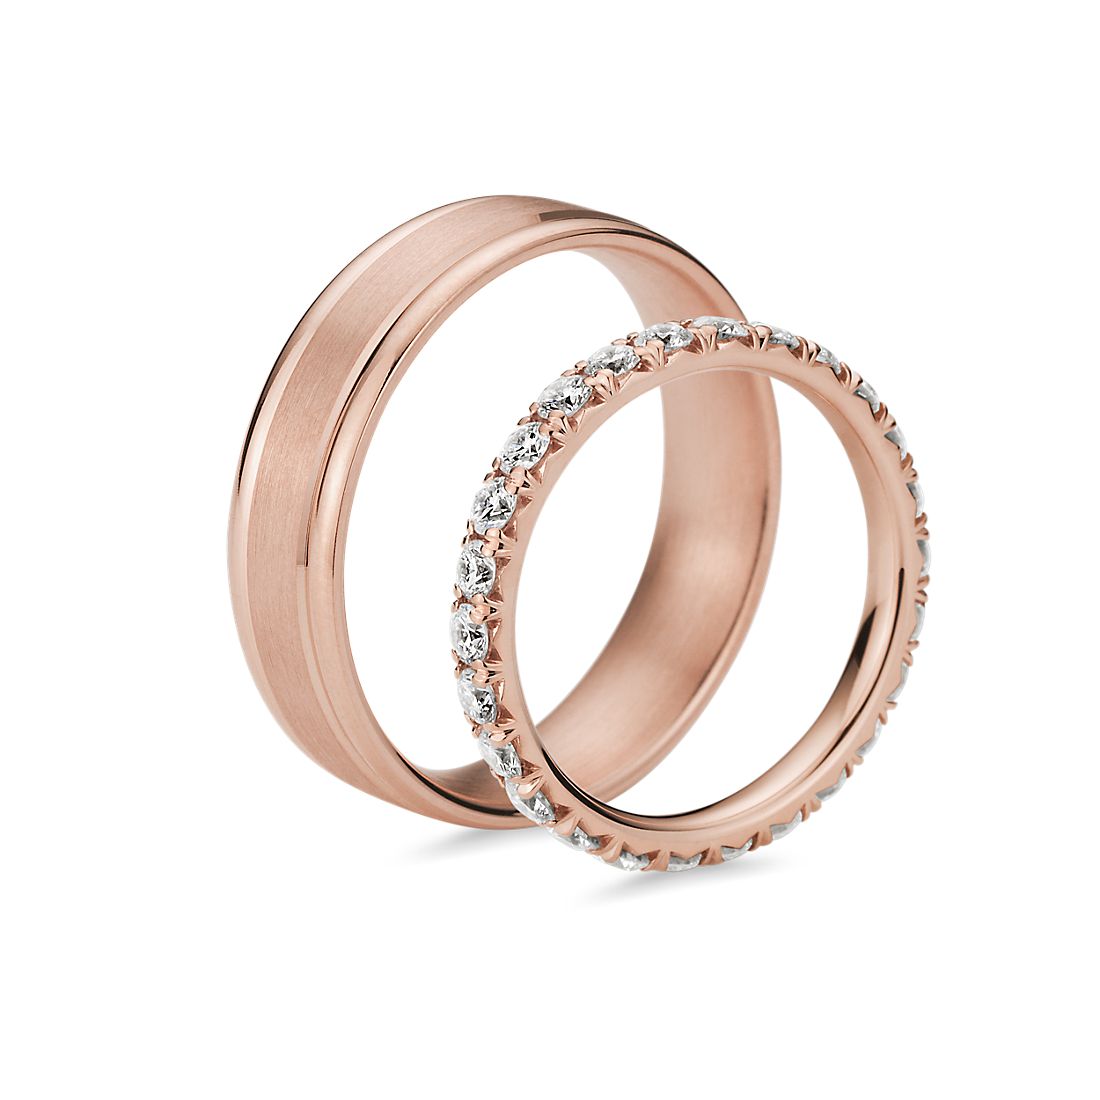 Side profile view of two complementary rings side by side